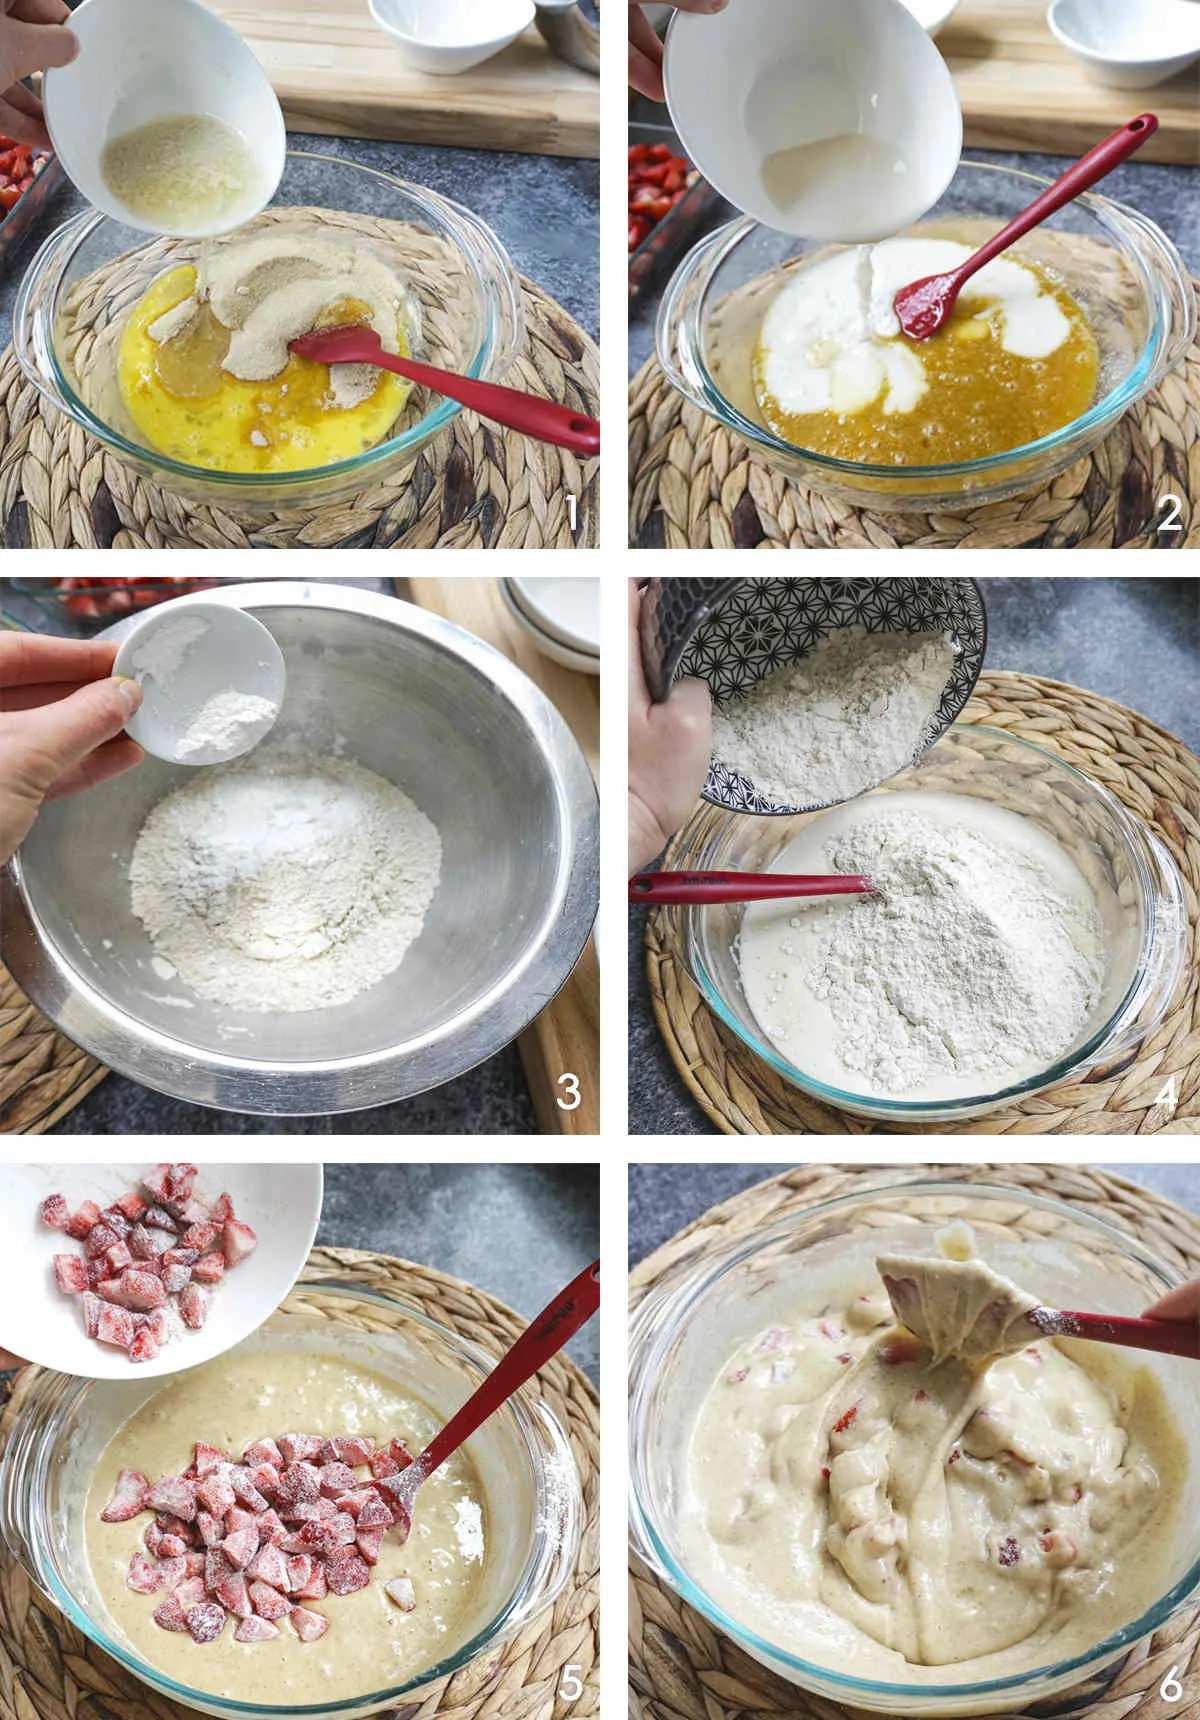 Process shots showing step by step how to make gluten free strawberry muffins, mixing the dary ingredients into wet ingredients.